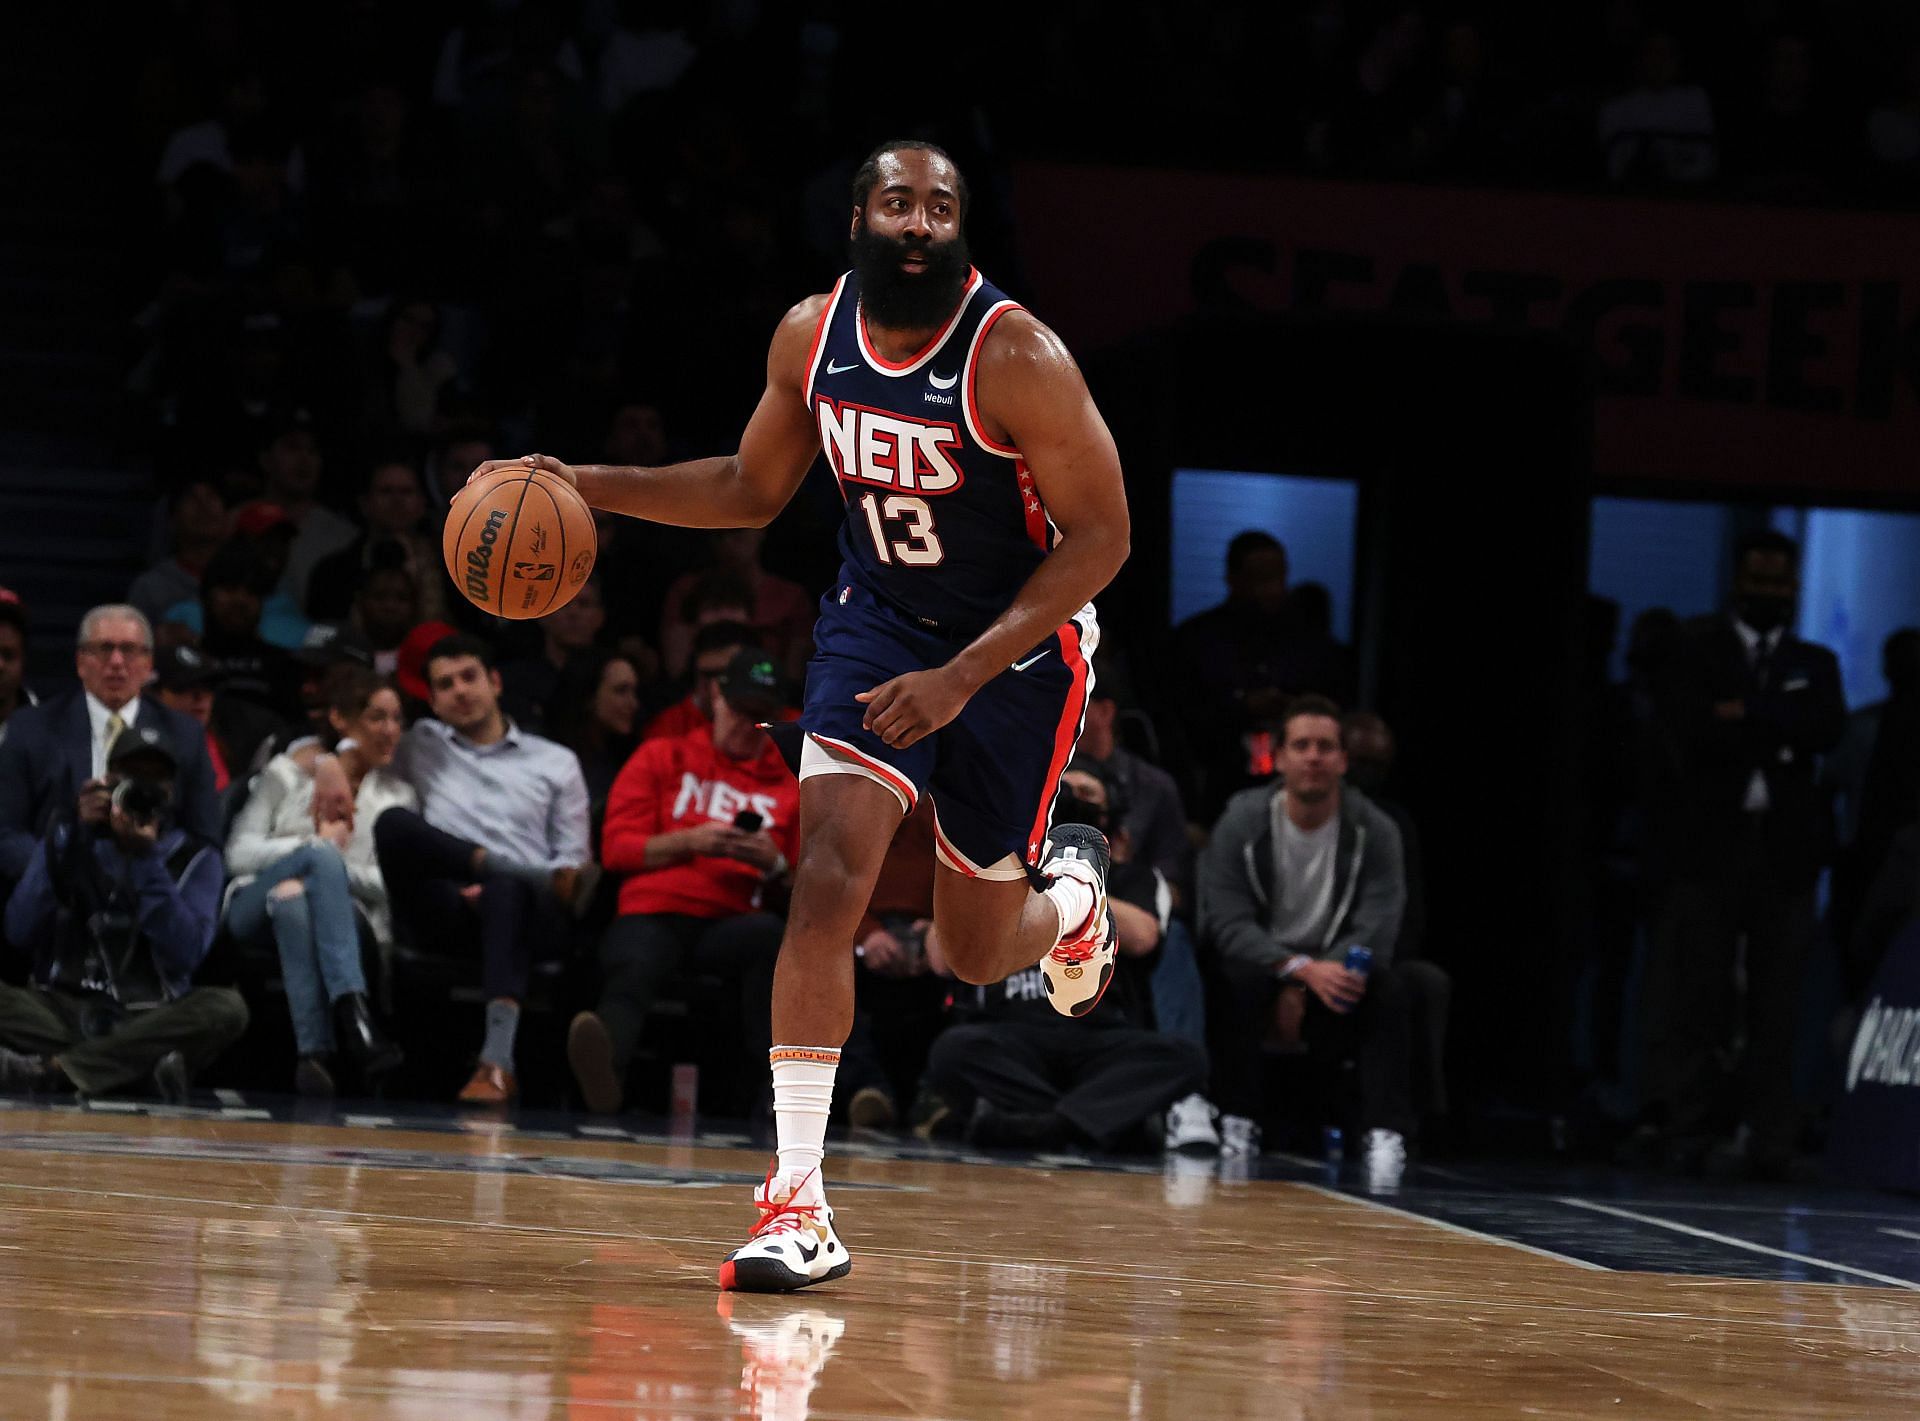 James Harden brings the ball up for the Brooklyn Nets.